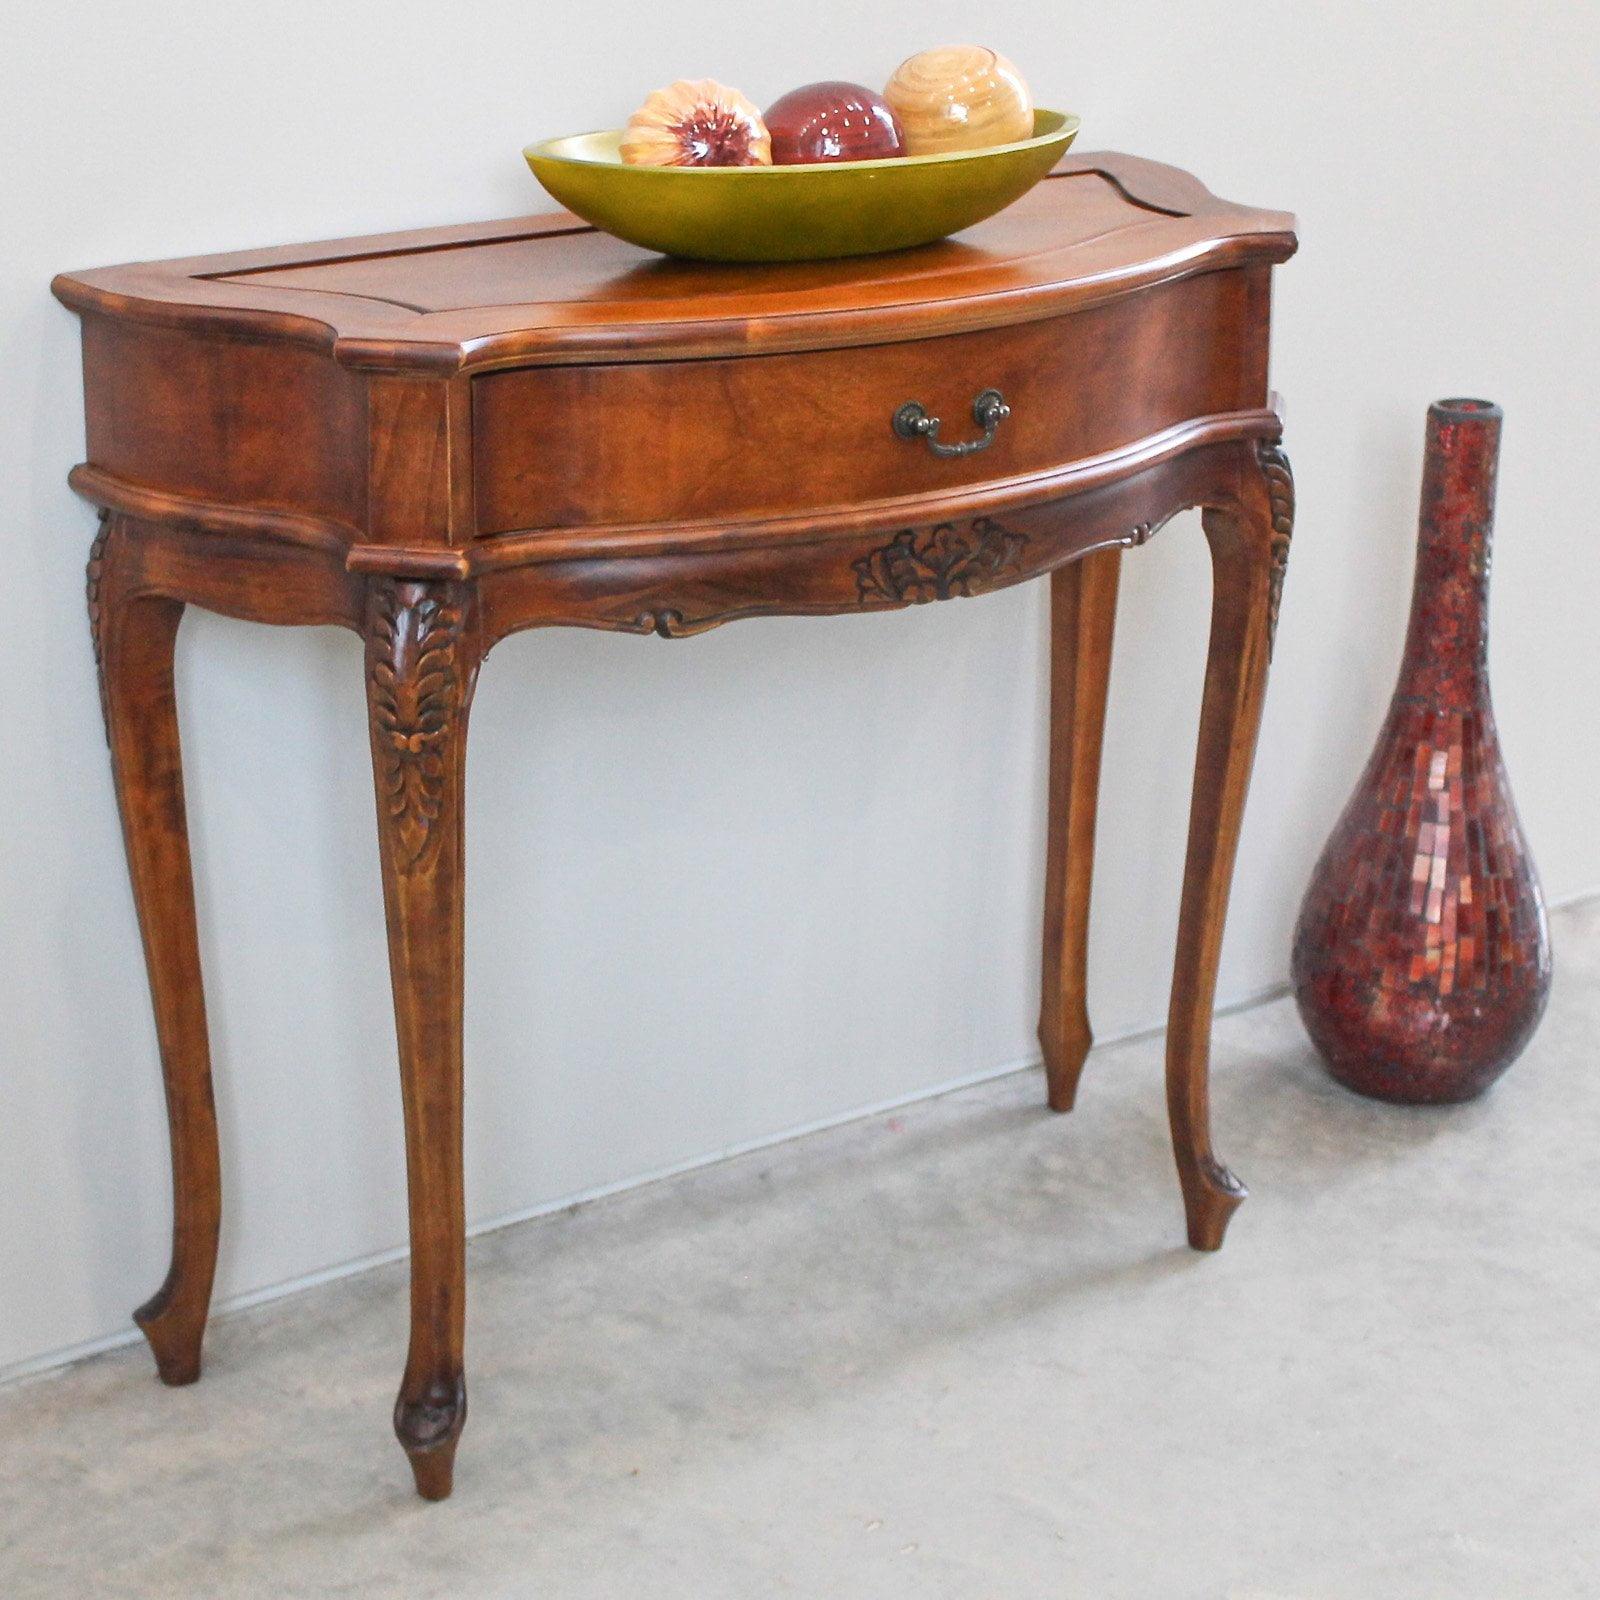 Elegant Windsor Hand-Carved Demilune Walnut Wood Console Table with Storage